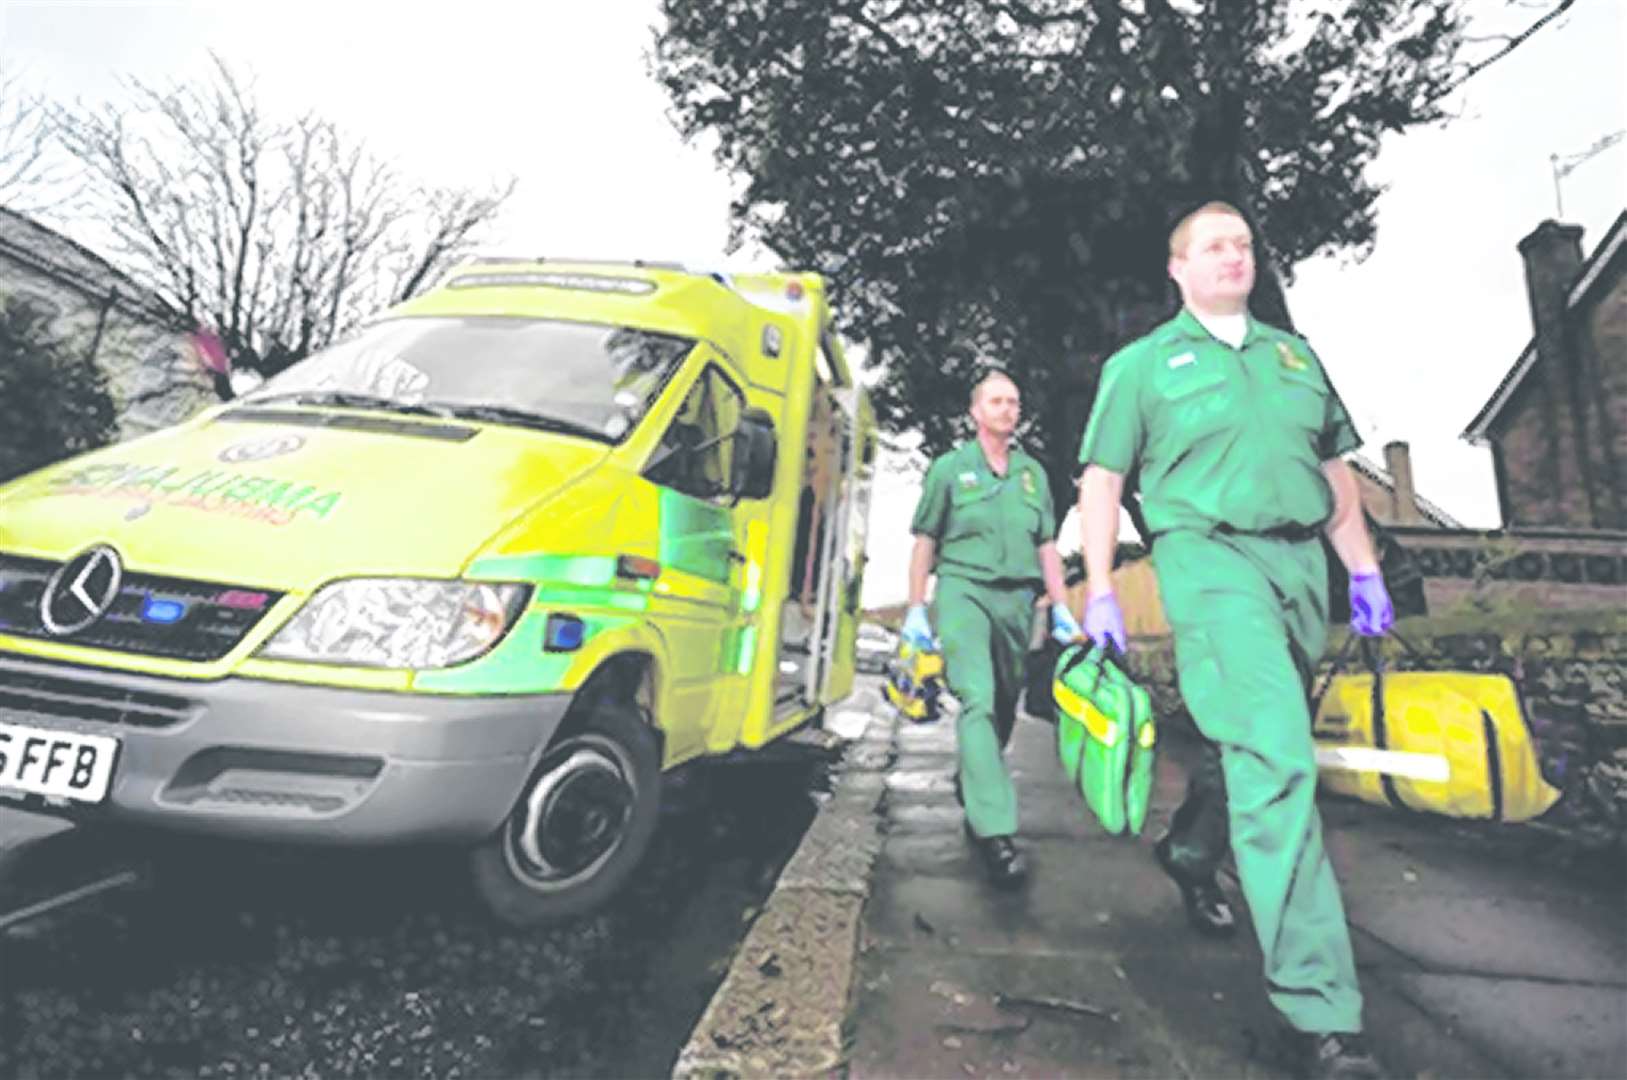 Ambulances in the county will have Riley Latham's drawing on them. Picture: South East Coast Ambulance Service